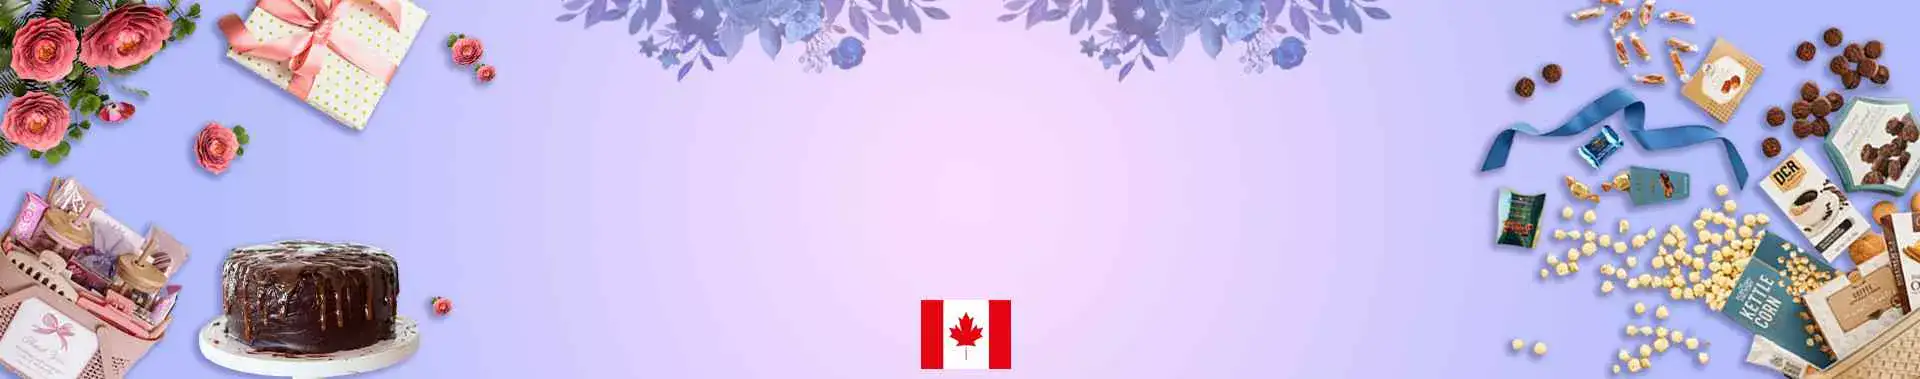 Send Gifts to Canada, Gift Baskets to Canada, Hampers to Canada, Hampers & Gifts delivery in Canada Online